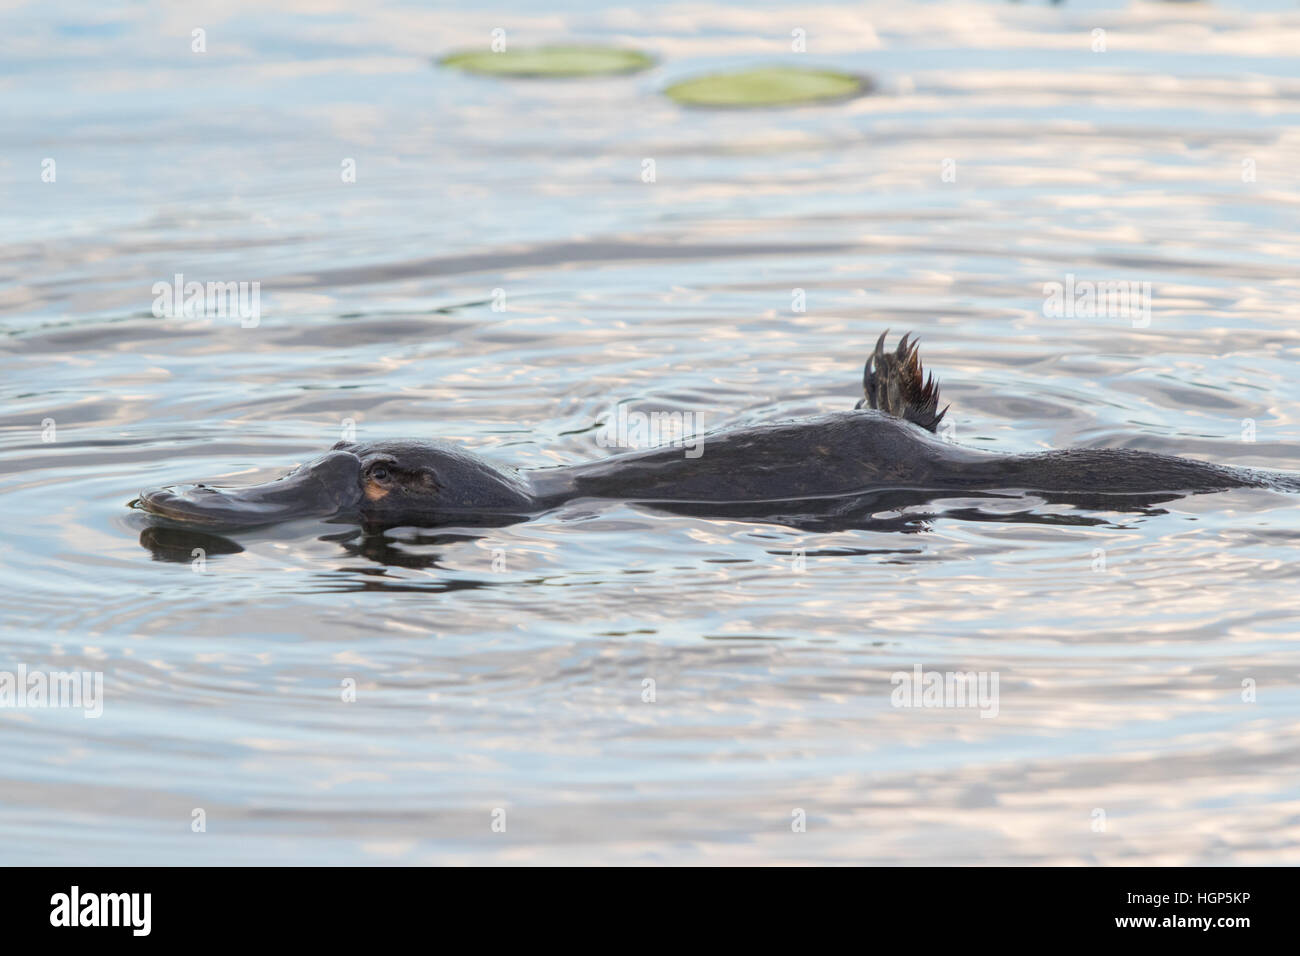 Duck-billed Platypus (Ornithorhynchus anatinus) swimming in a lilypond Stock Photo